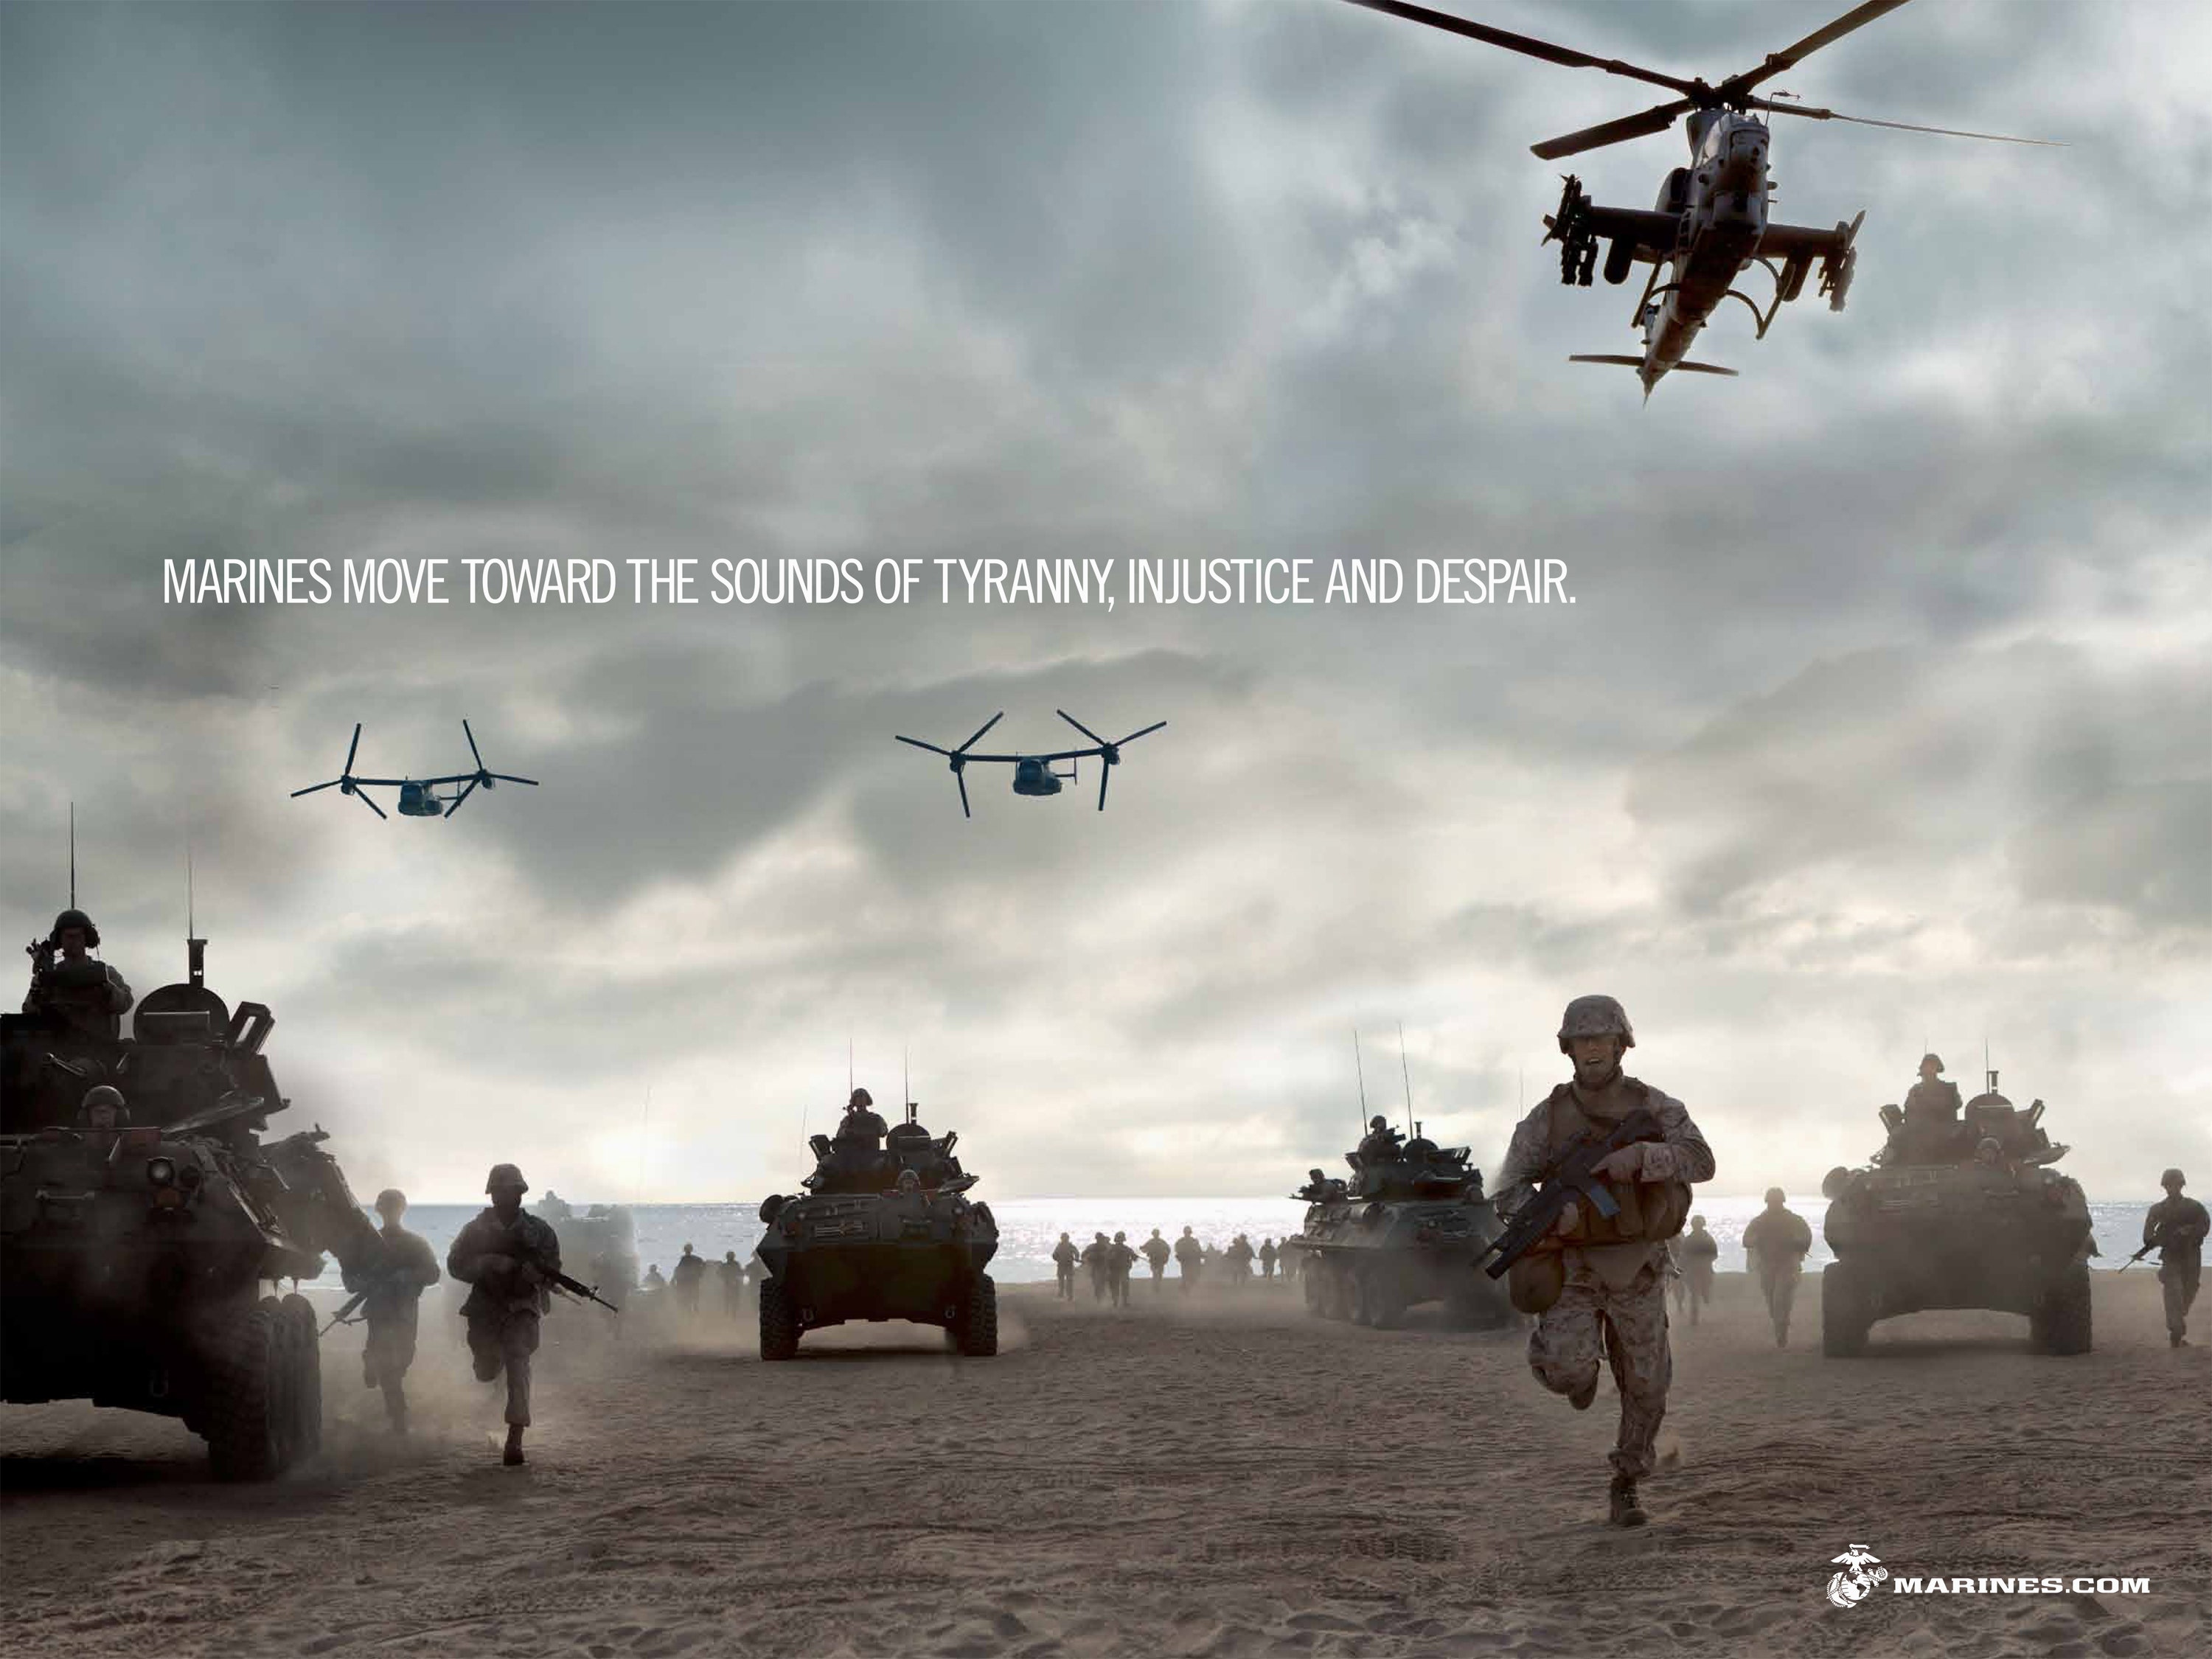 In this promotional banner of Film Z showing the marines when